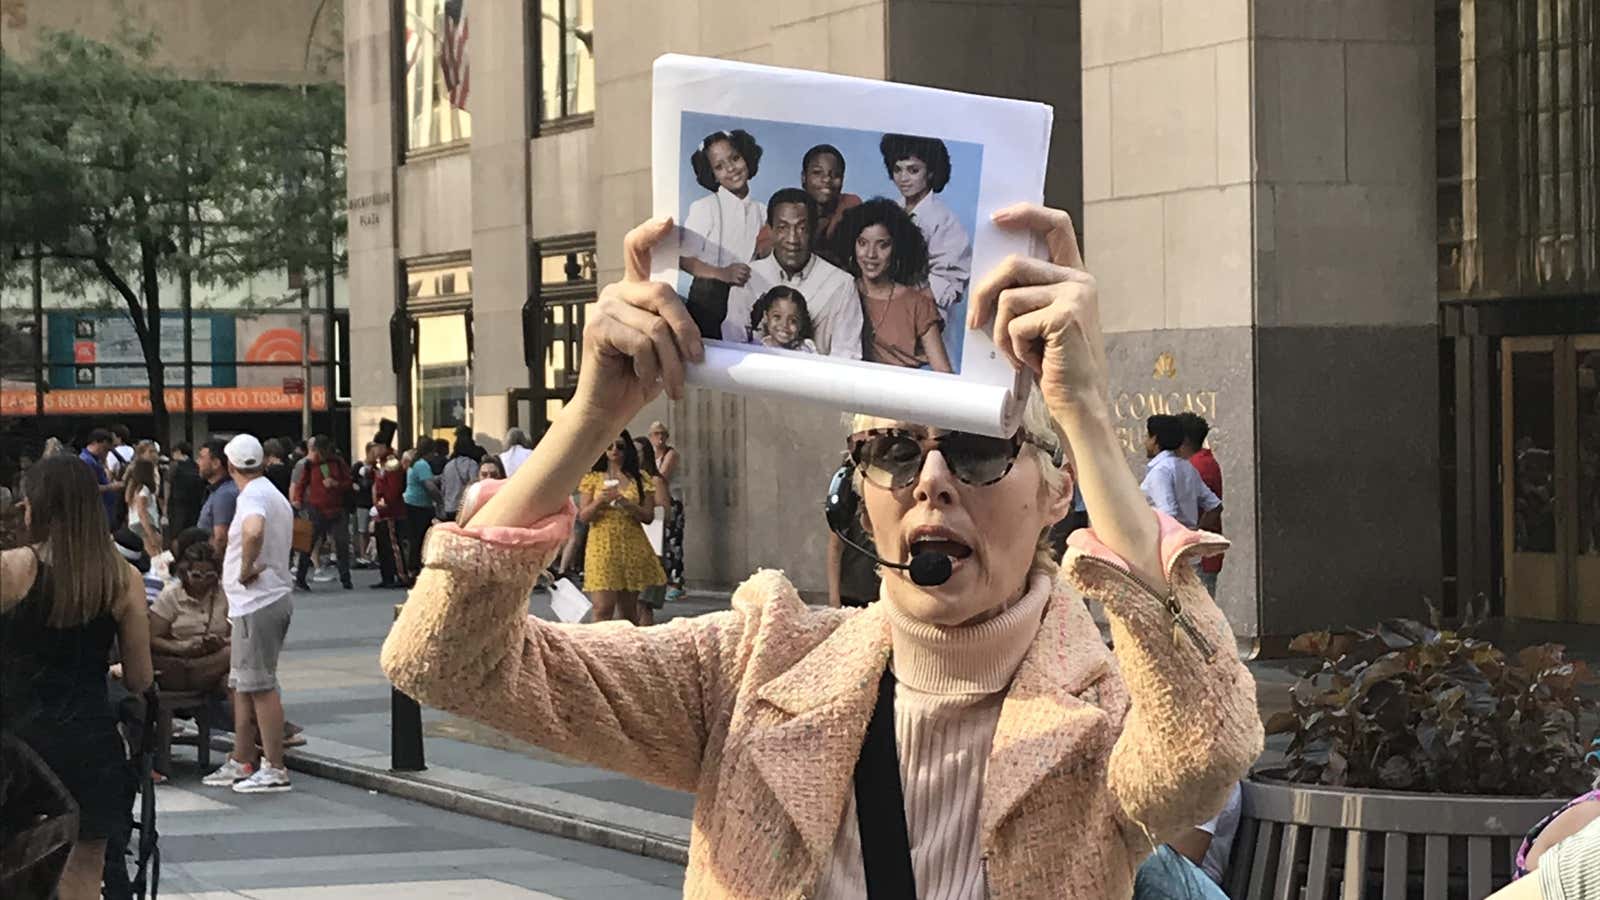 E. Jean Carroll holds a photo of Bill Cosby on her “hideous men” tour